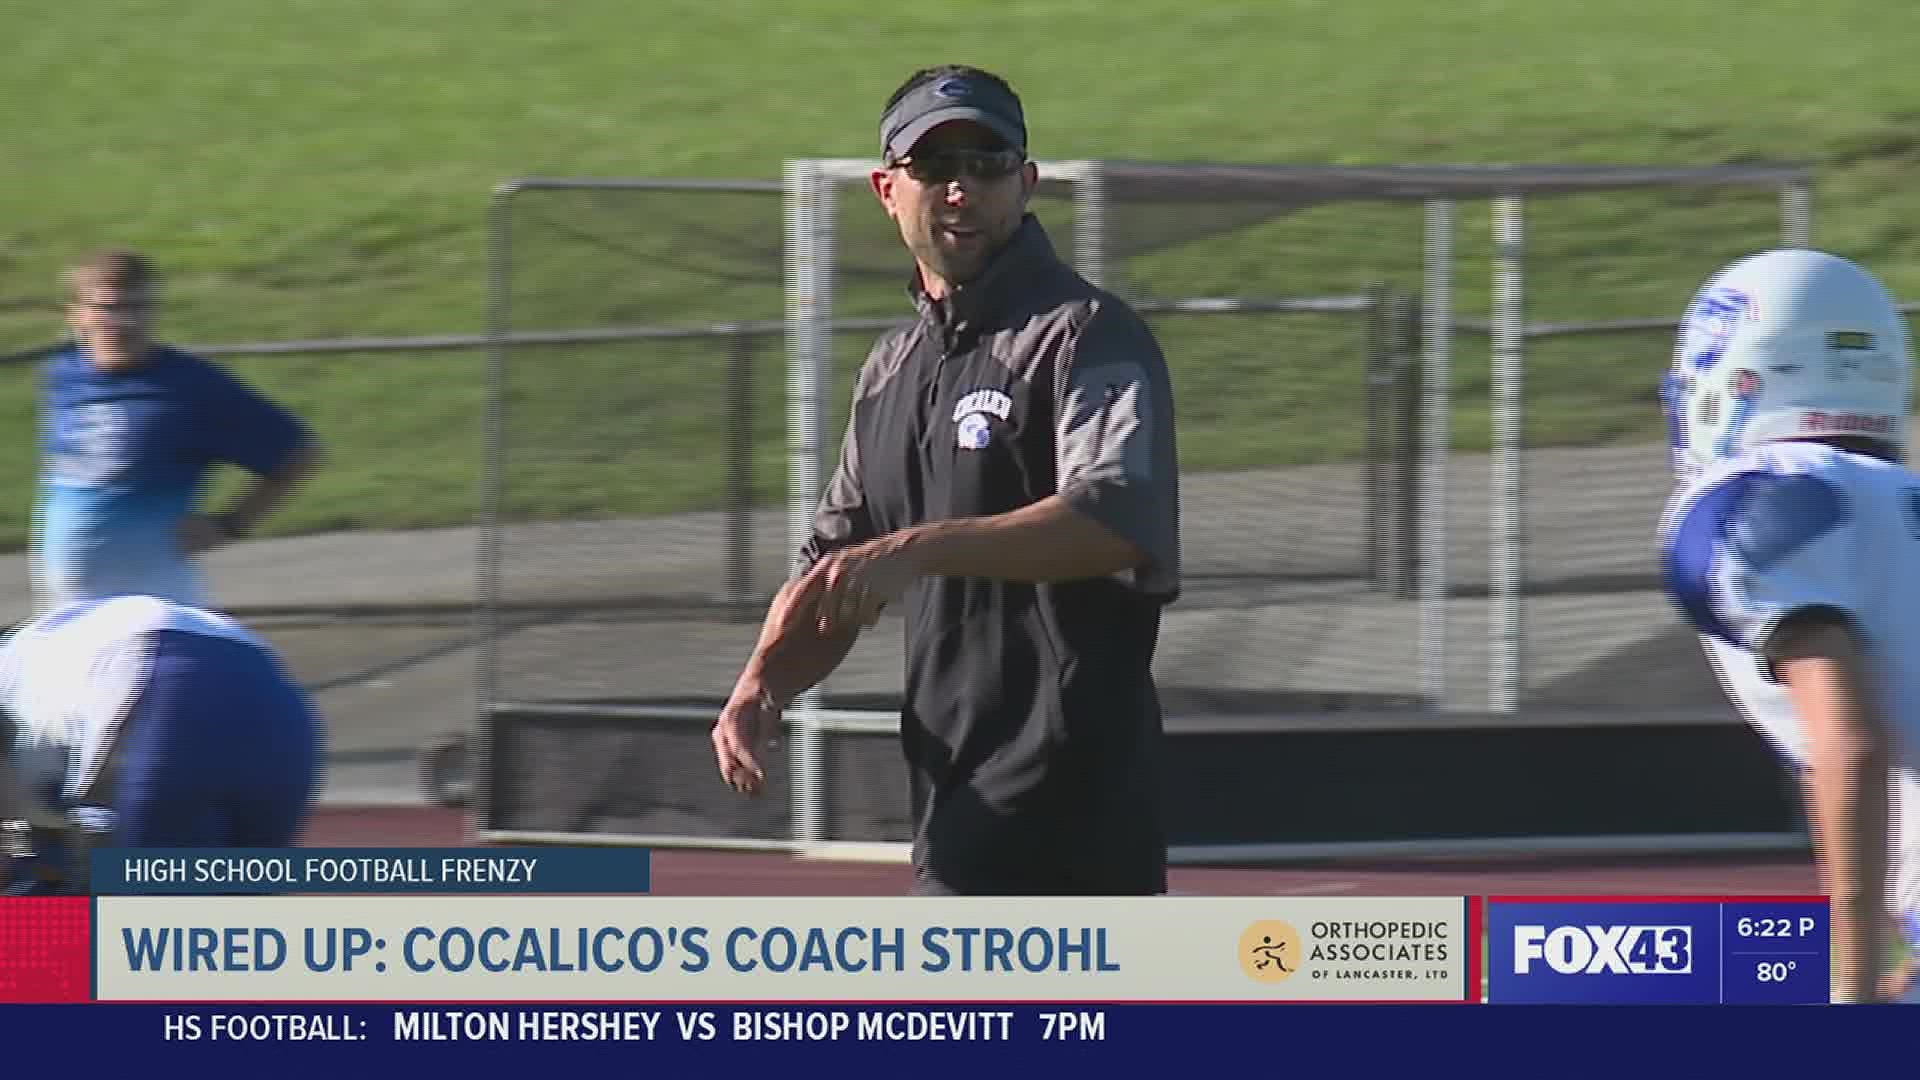 HSFF 'Wired Up' with Cocalico's coach Strohl.